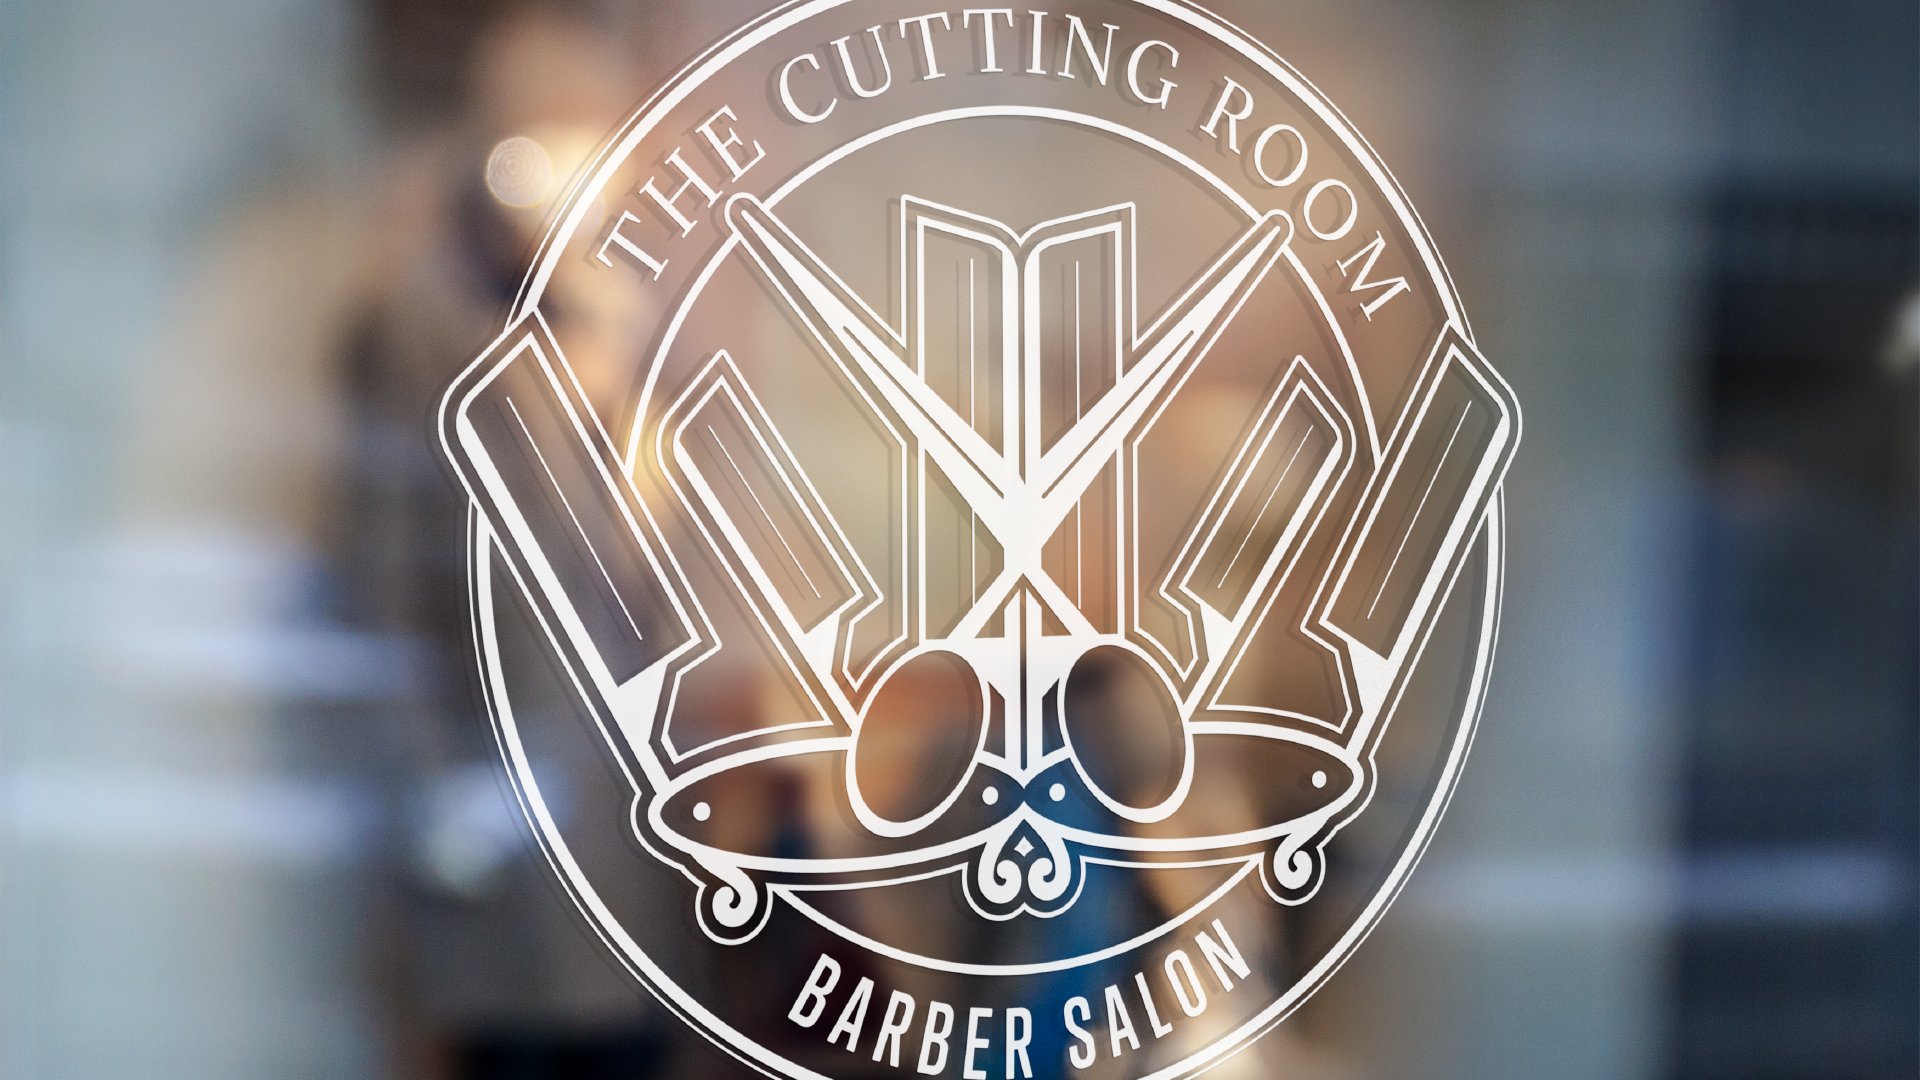 The Cutting Room Barber Salon logo is on a glass door. The words circle round a series of six shaving blades pointed to the middle and a pair of scissors in the center.